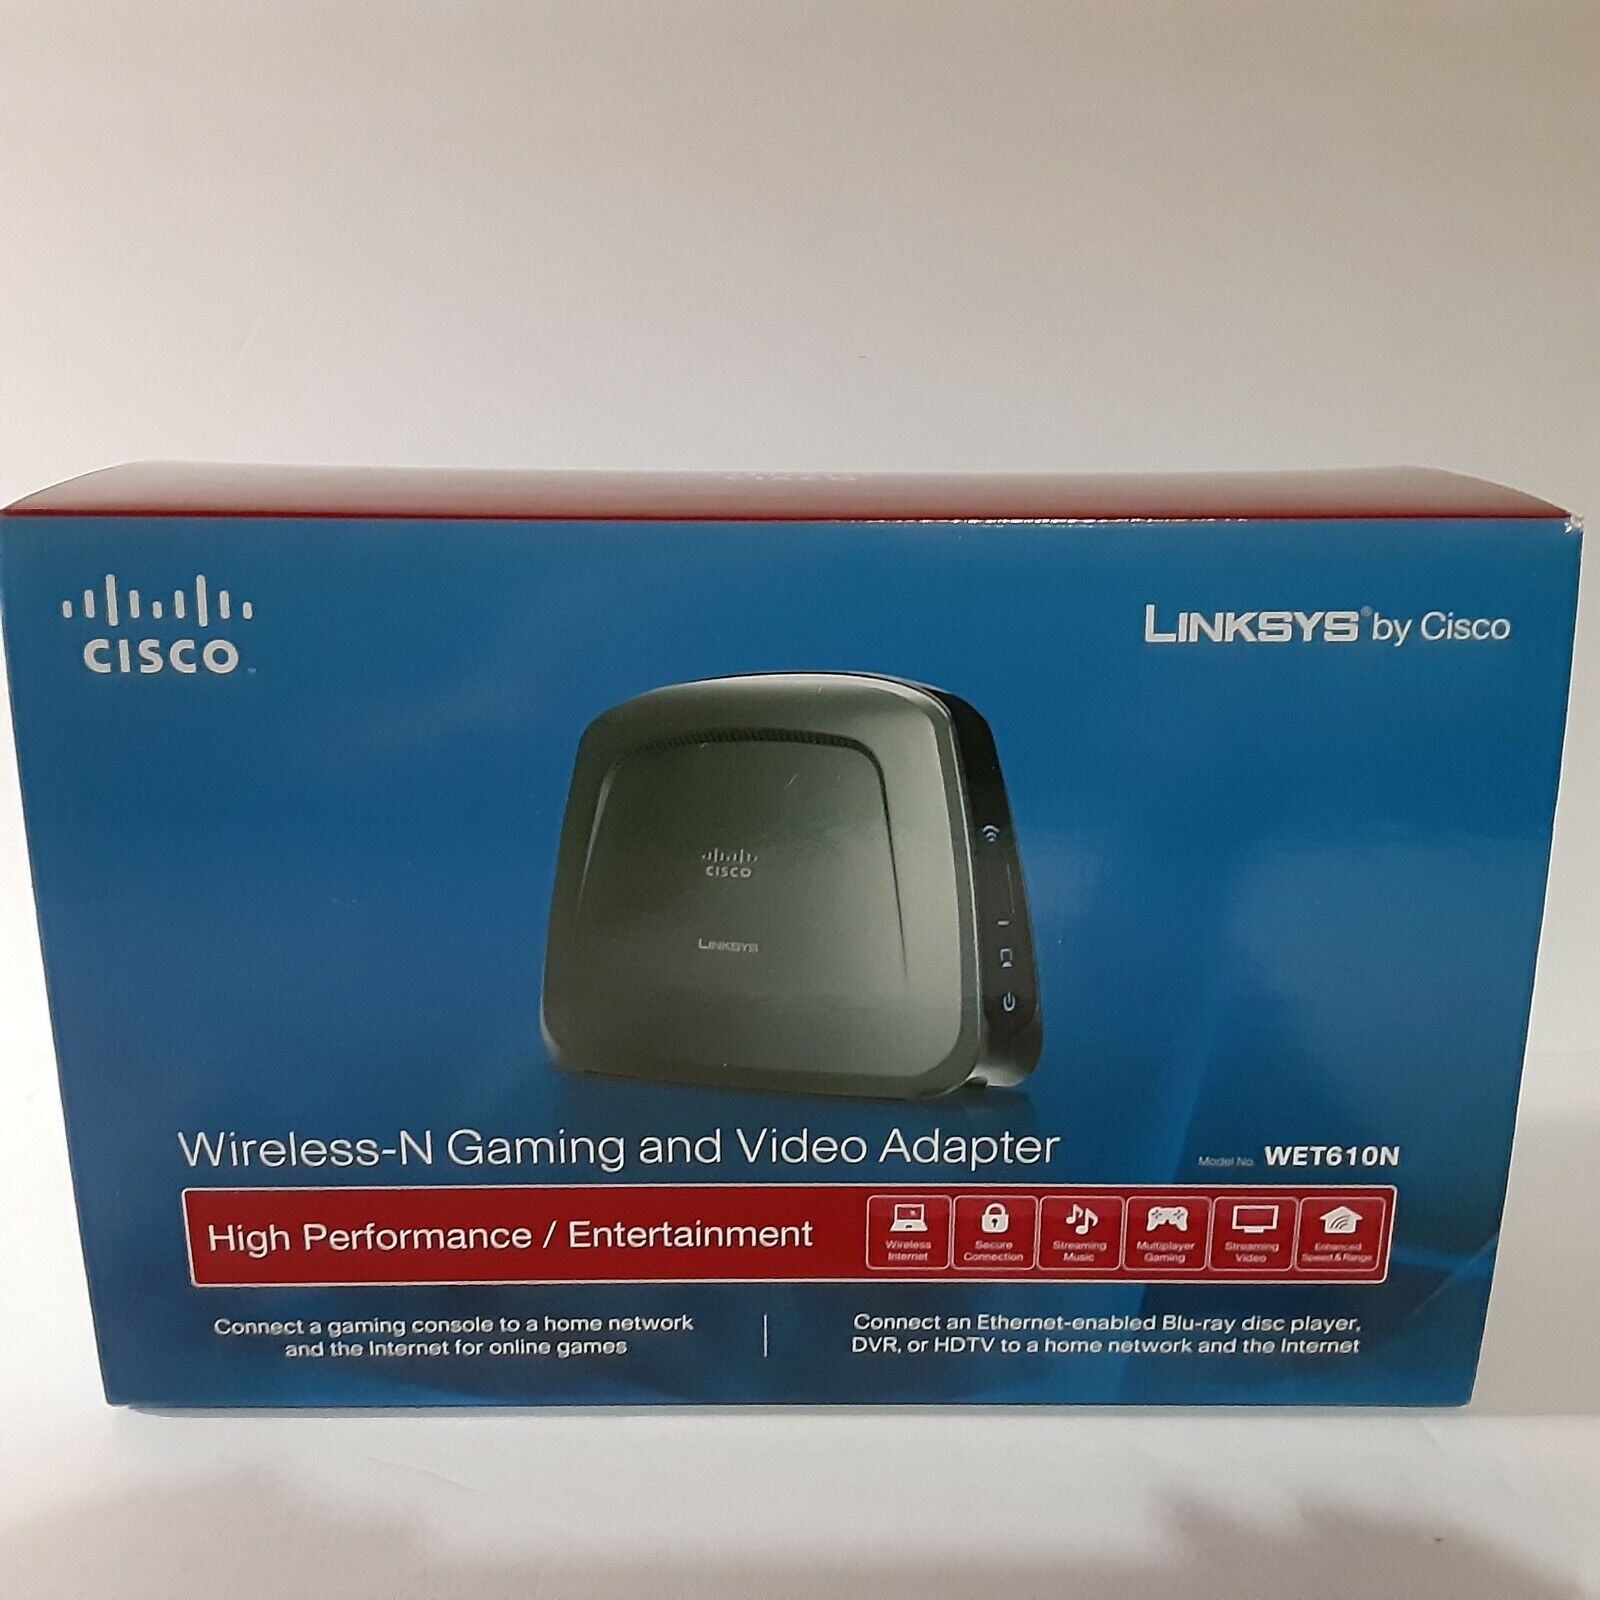 Linksys by Cisco Wireless-N-Gaming and Video Adapter WET610N No power cord